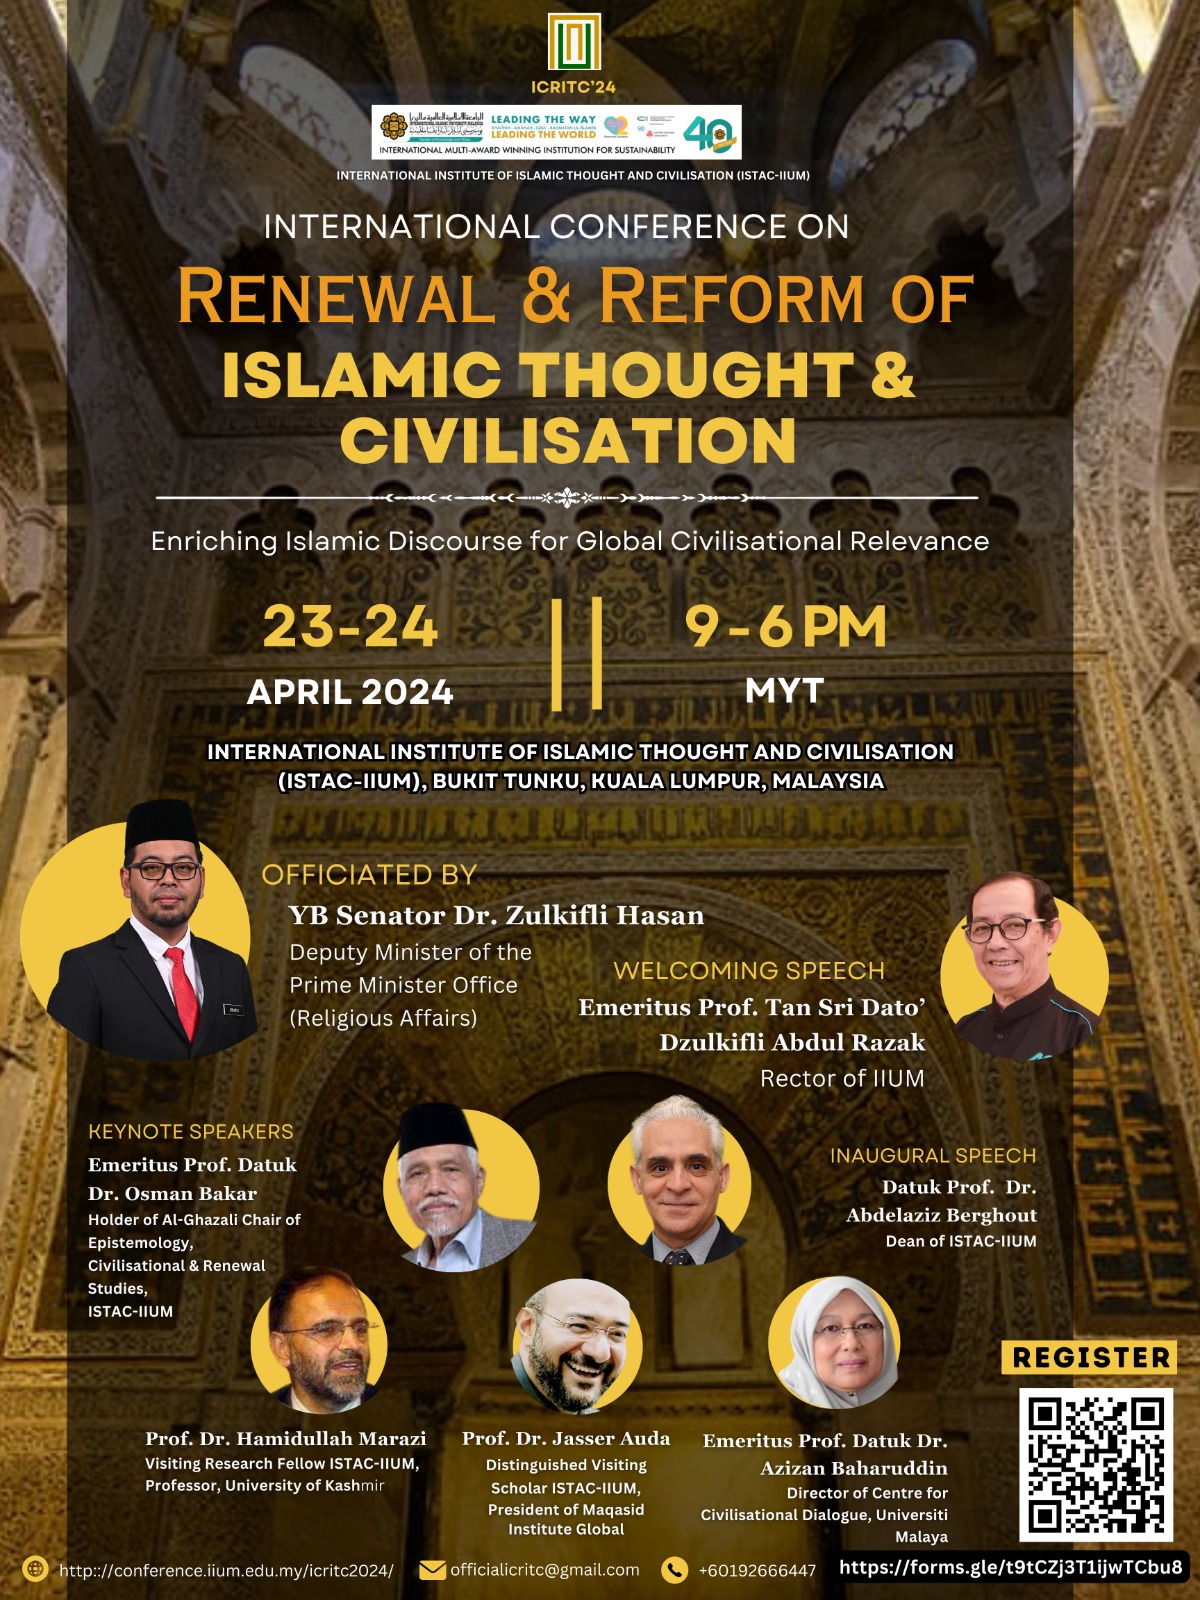 INTERNATIONAL CONFERENCE ON RENEWAL AND REFORM OF ISLAMIC THOUGHT AND CIVILISATION